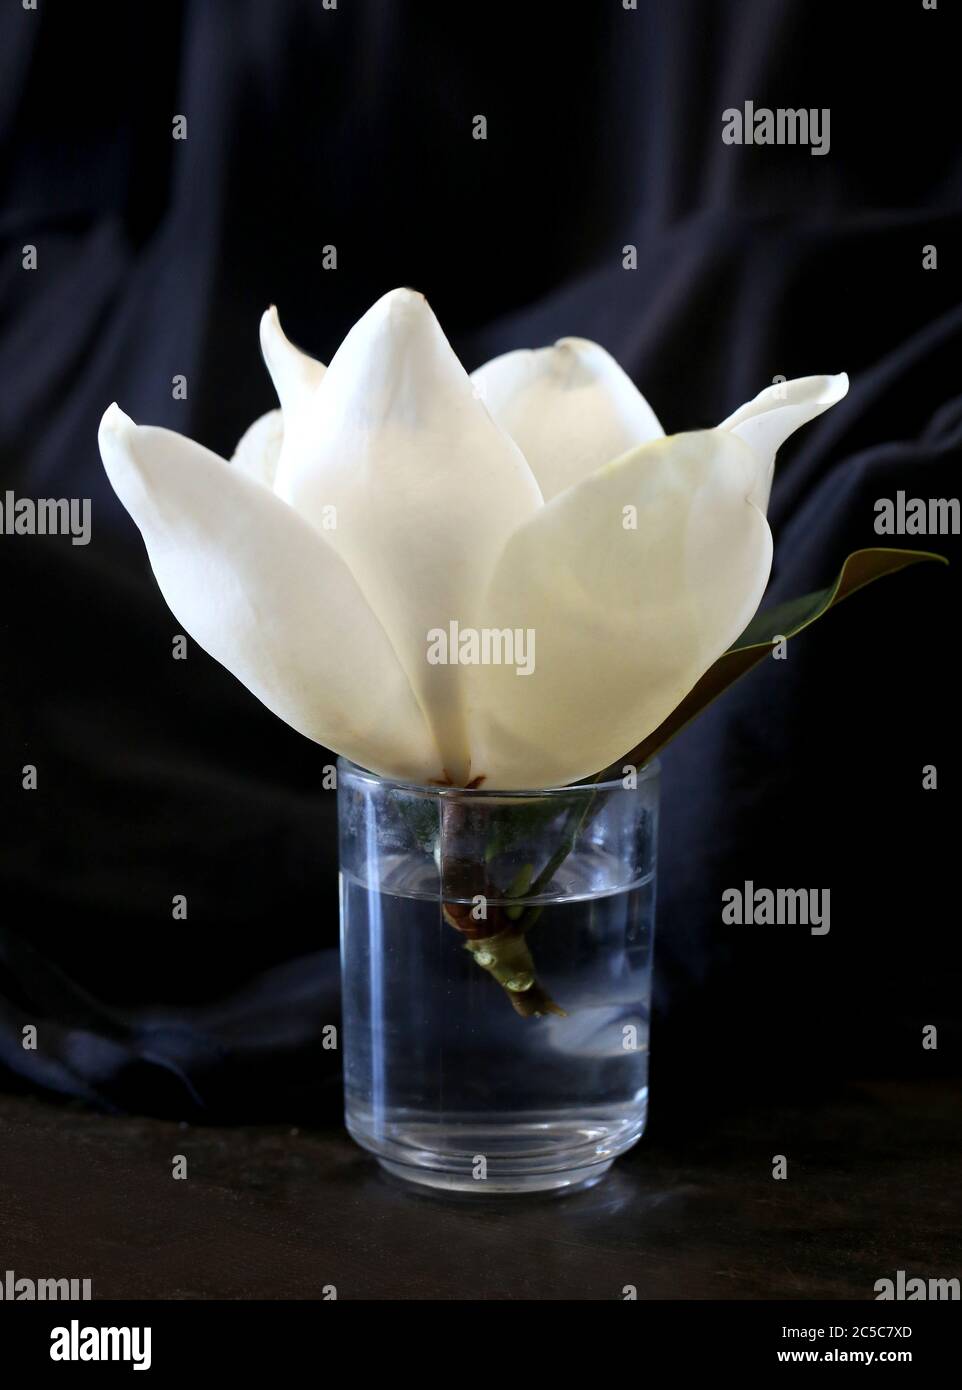 Photo of a beautiful Magnolia flower on a dark background Stock Photo